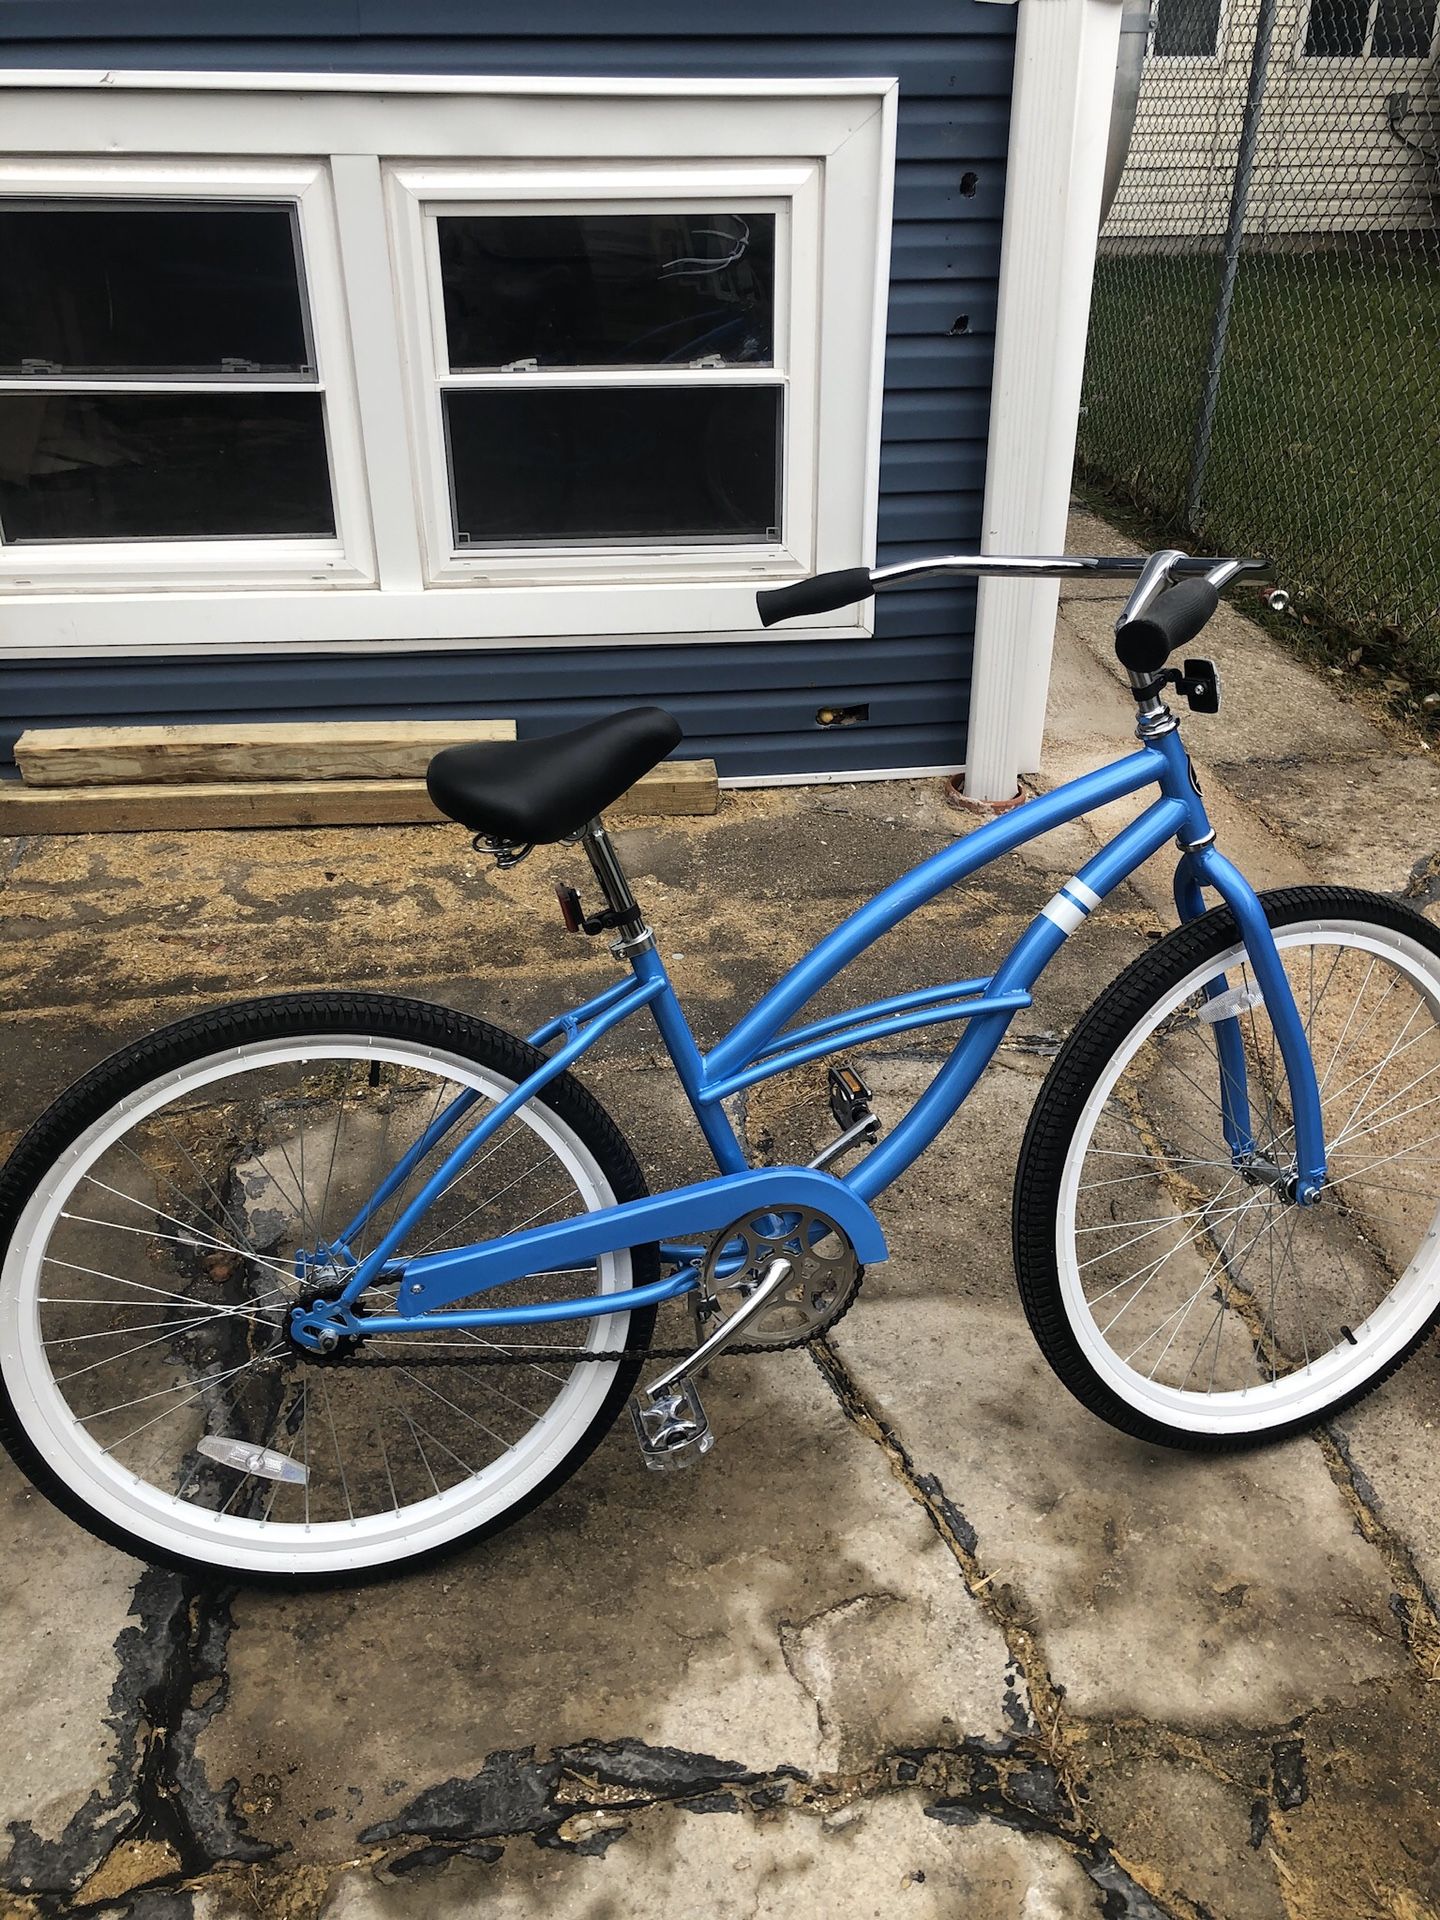 Sole bicycle cruiser